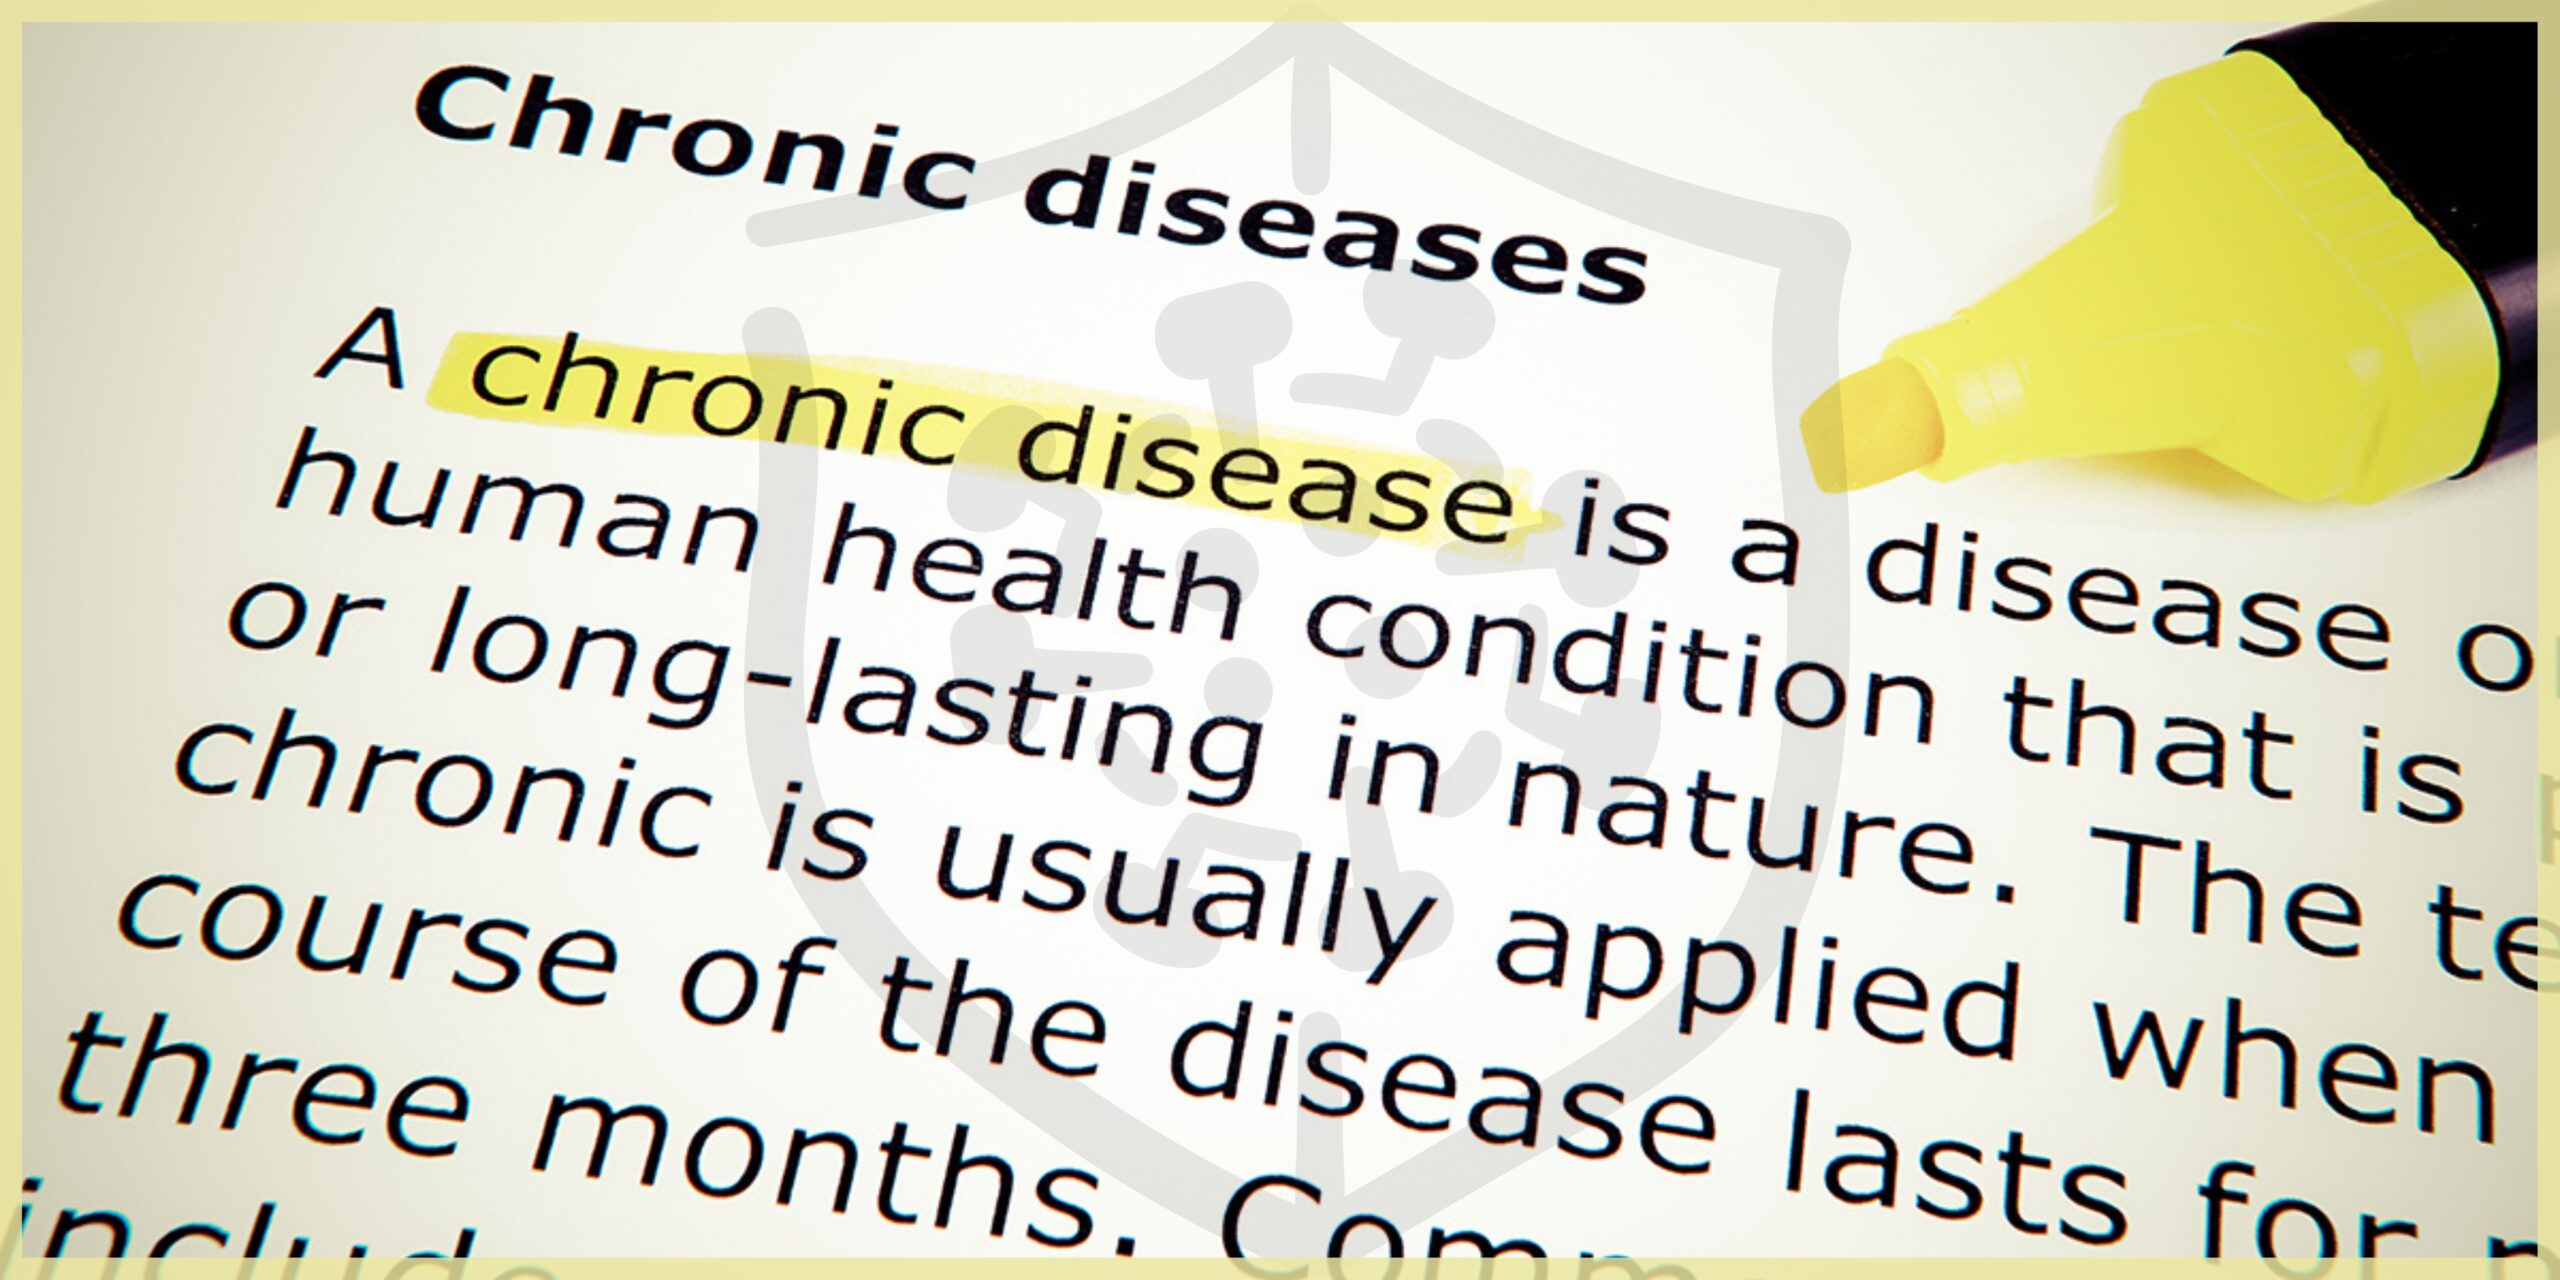 Things you most likely didn’t know about Chronic diseases!